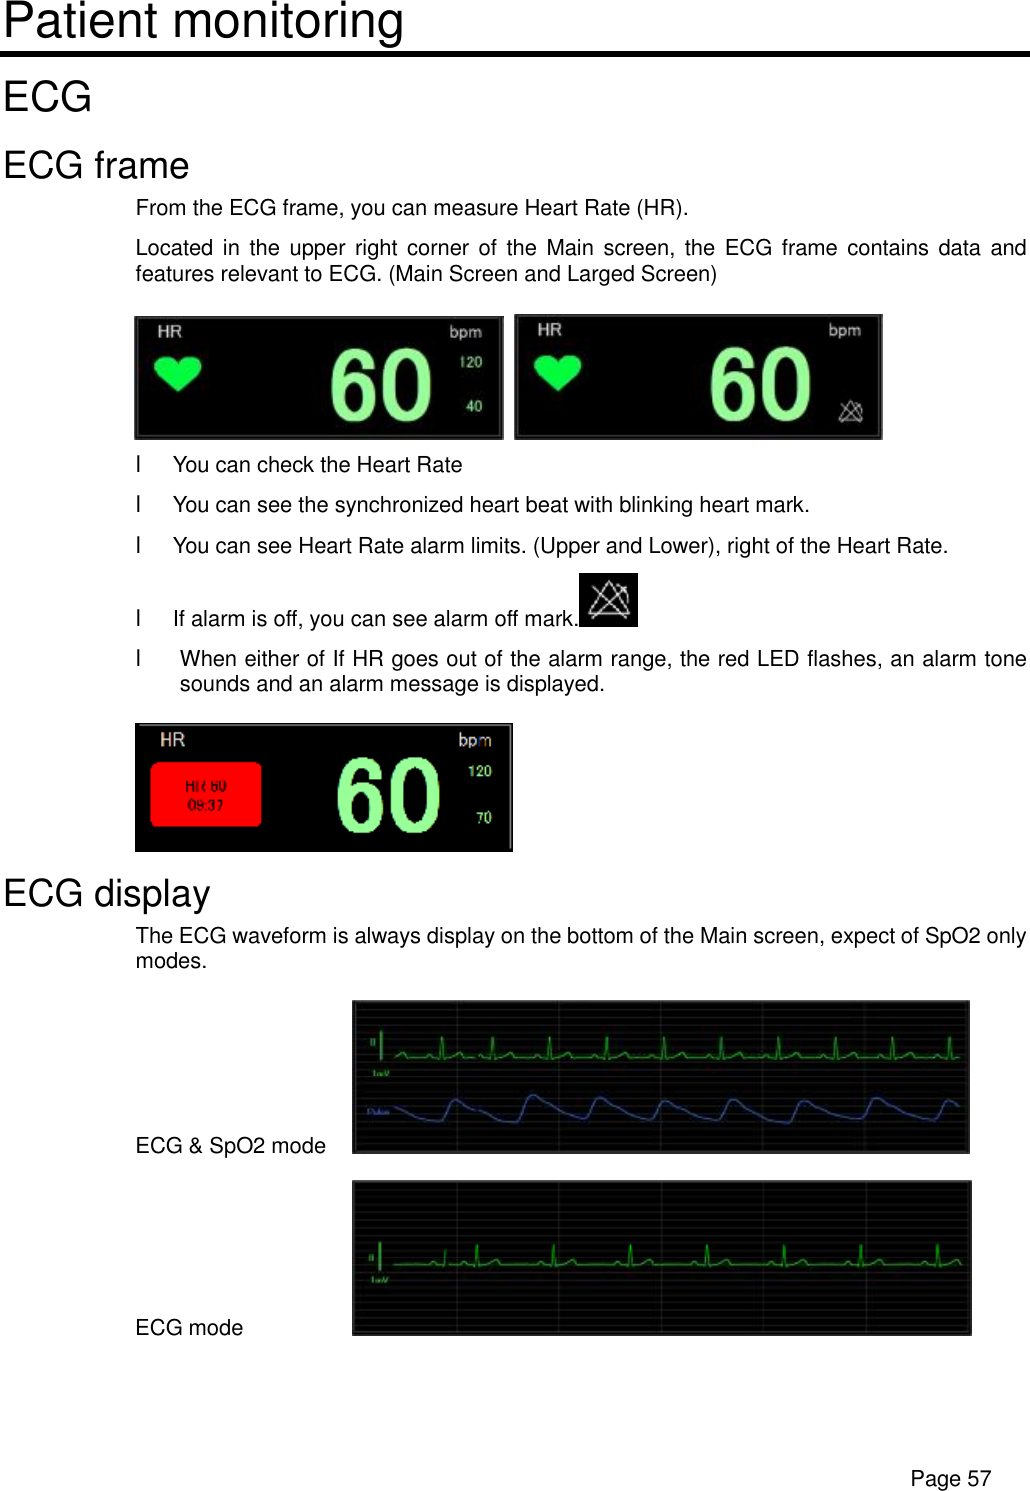      Page 57 Patient monitoring ECG ECG frame From the ECG frame, you can measure Heart Rate (HR). Located in the upper right corner of the Main screen, the ECG frame contains data and features relevant to ECG. (Main Screen and Larged Screen)    l You can check the Heart Rate l You can see the synchronized heart beat with blinking heart mark. l You can see Heart Rate alarm limits. (Upper and Lower), right of the Heart Rate. l If alarm is off, you can see alarm off mark.  l When either of If HR goes out of the alarm range, the red LED flashes, an alarm tone sounds and an alarm message is displayed.  ECG display The ECG waveform is always display on the bottom of the Main screen, expect of SpO2 only modes. ECG &amp; SpO2 mode    ECG mode     